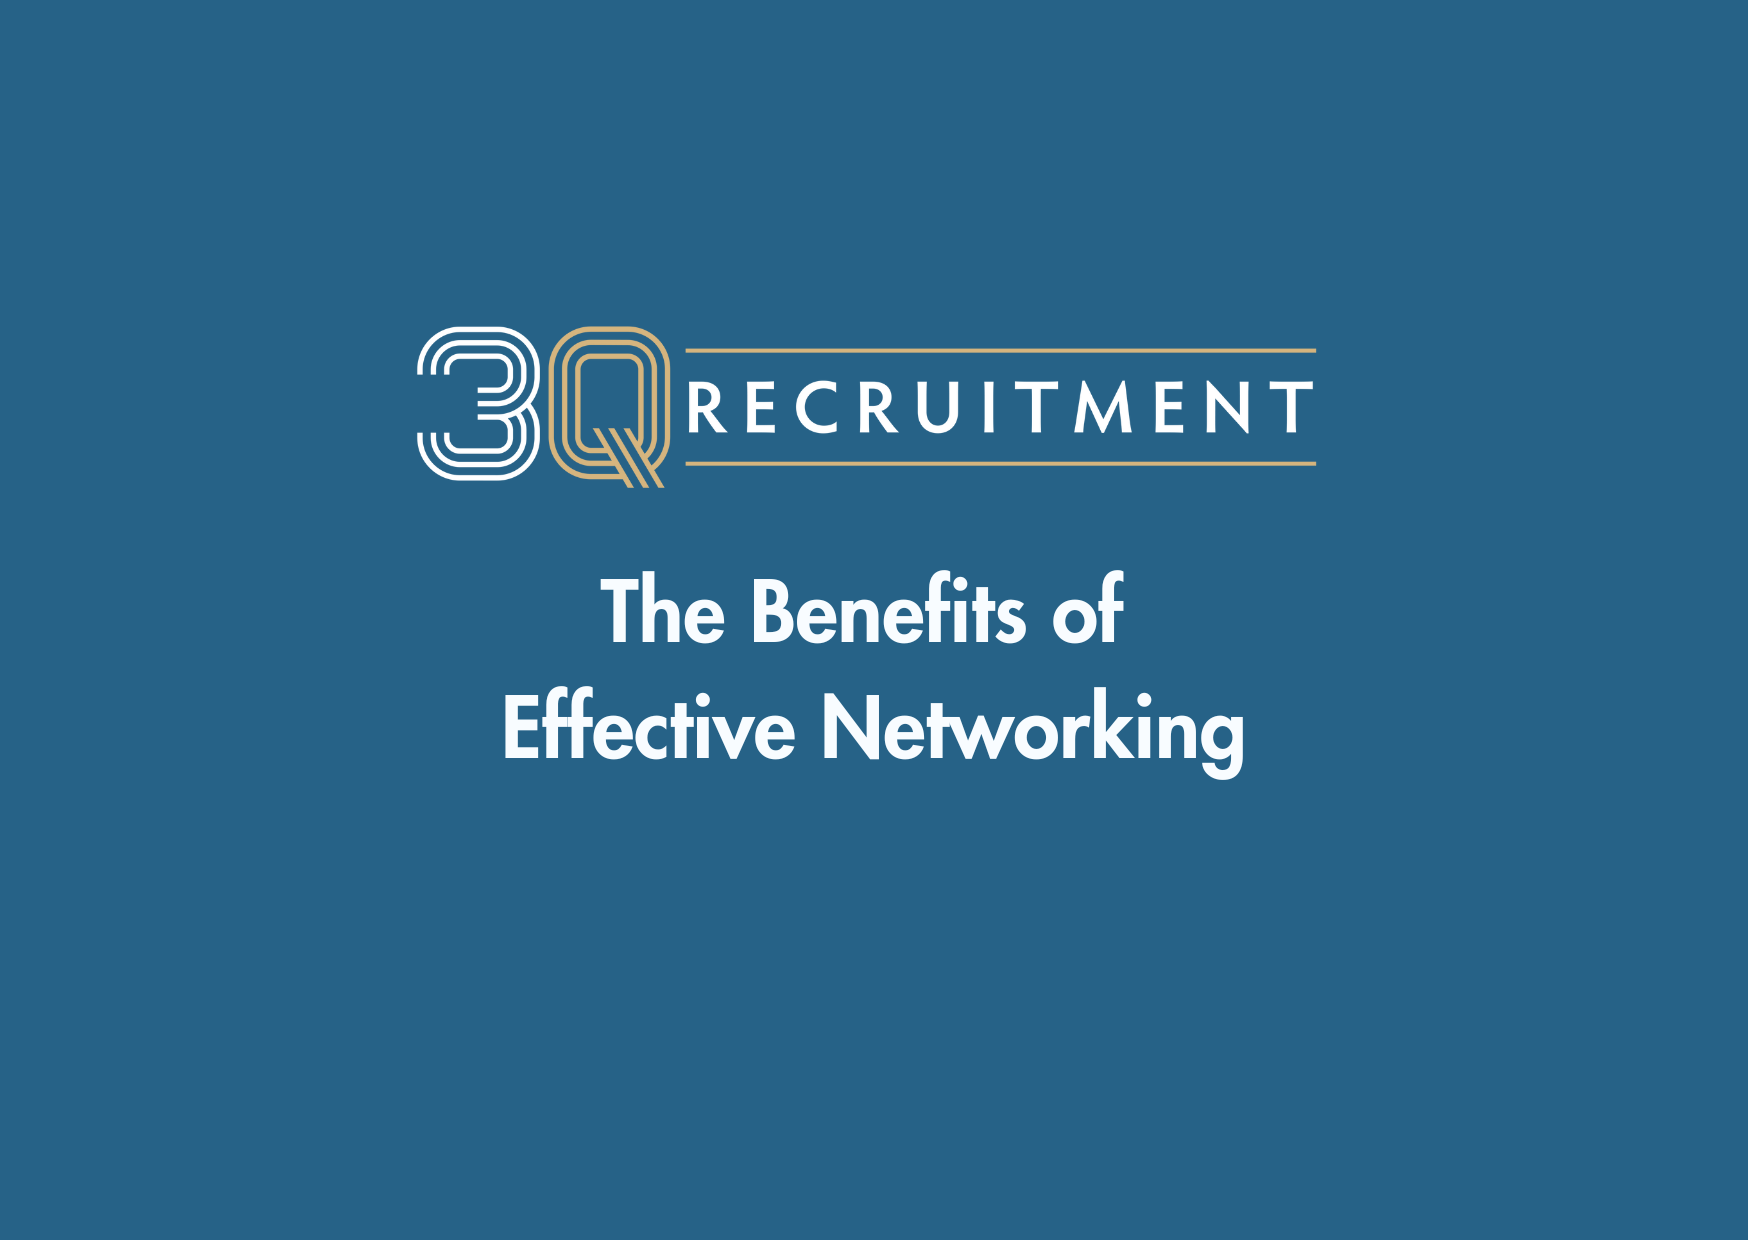 3Q Recruitment The Benefits of Effective Networking